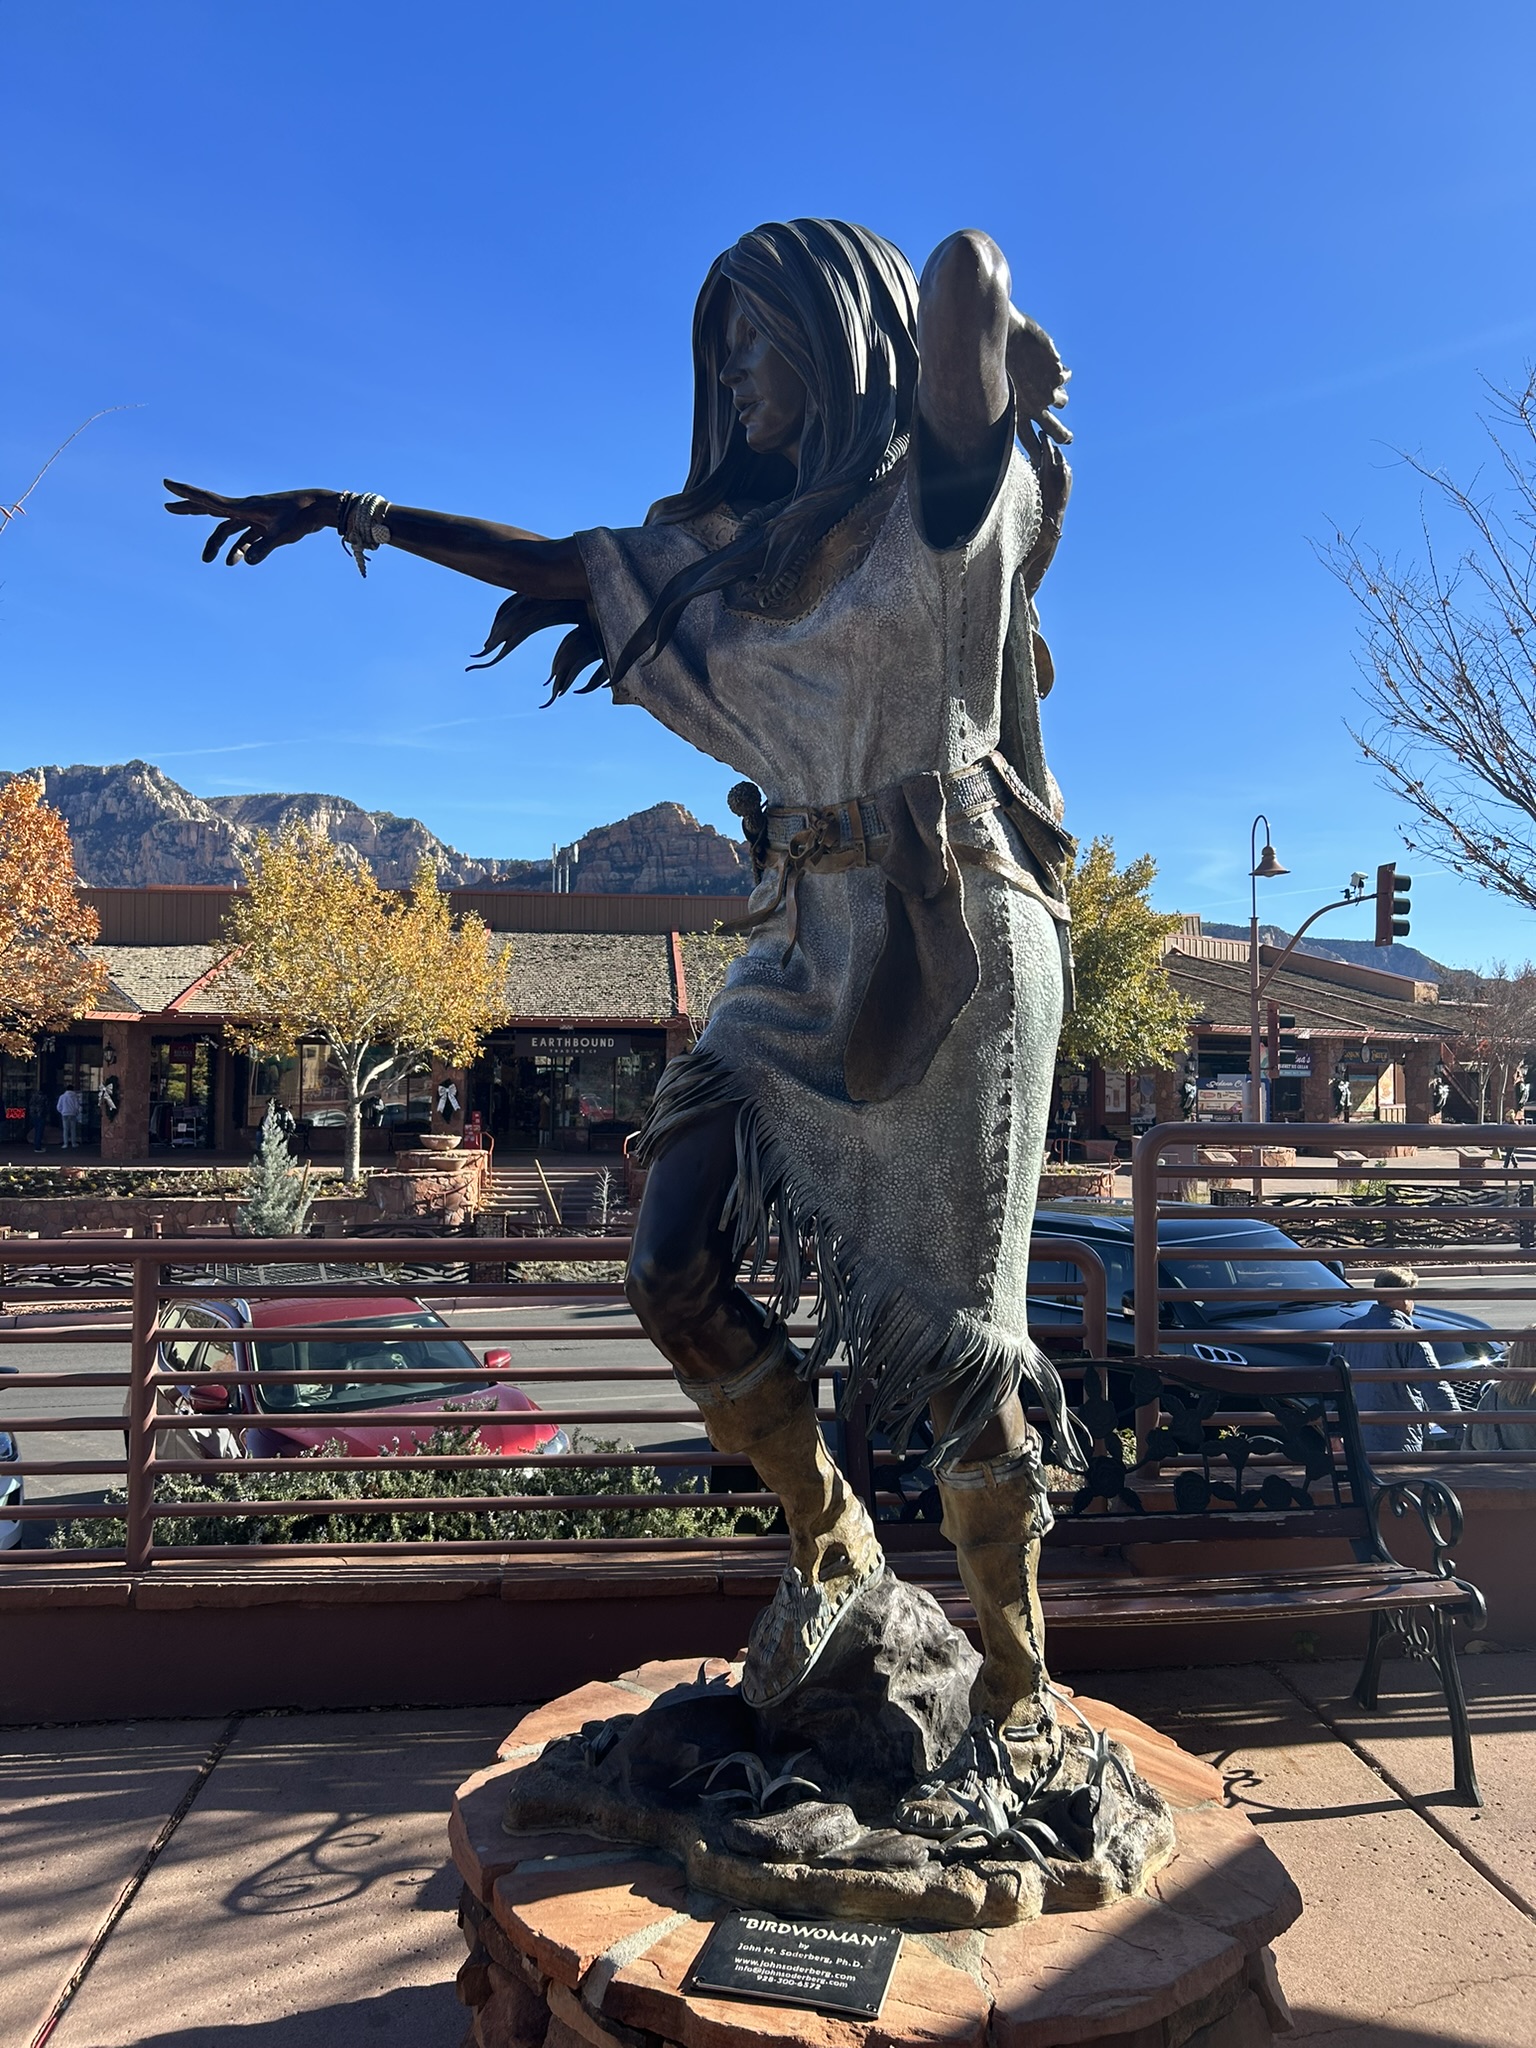 View of a statue in Old Town Sedona - Arizona's Red Rock Country